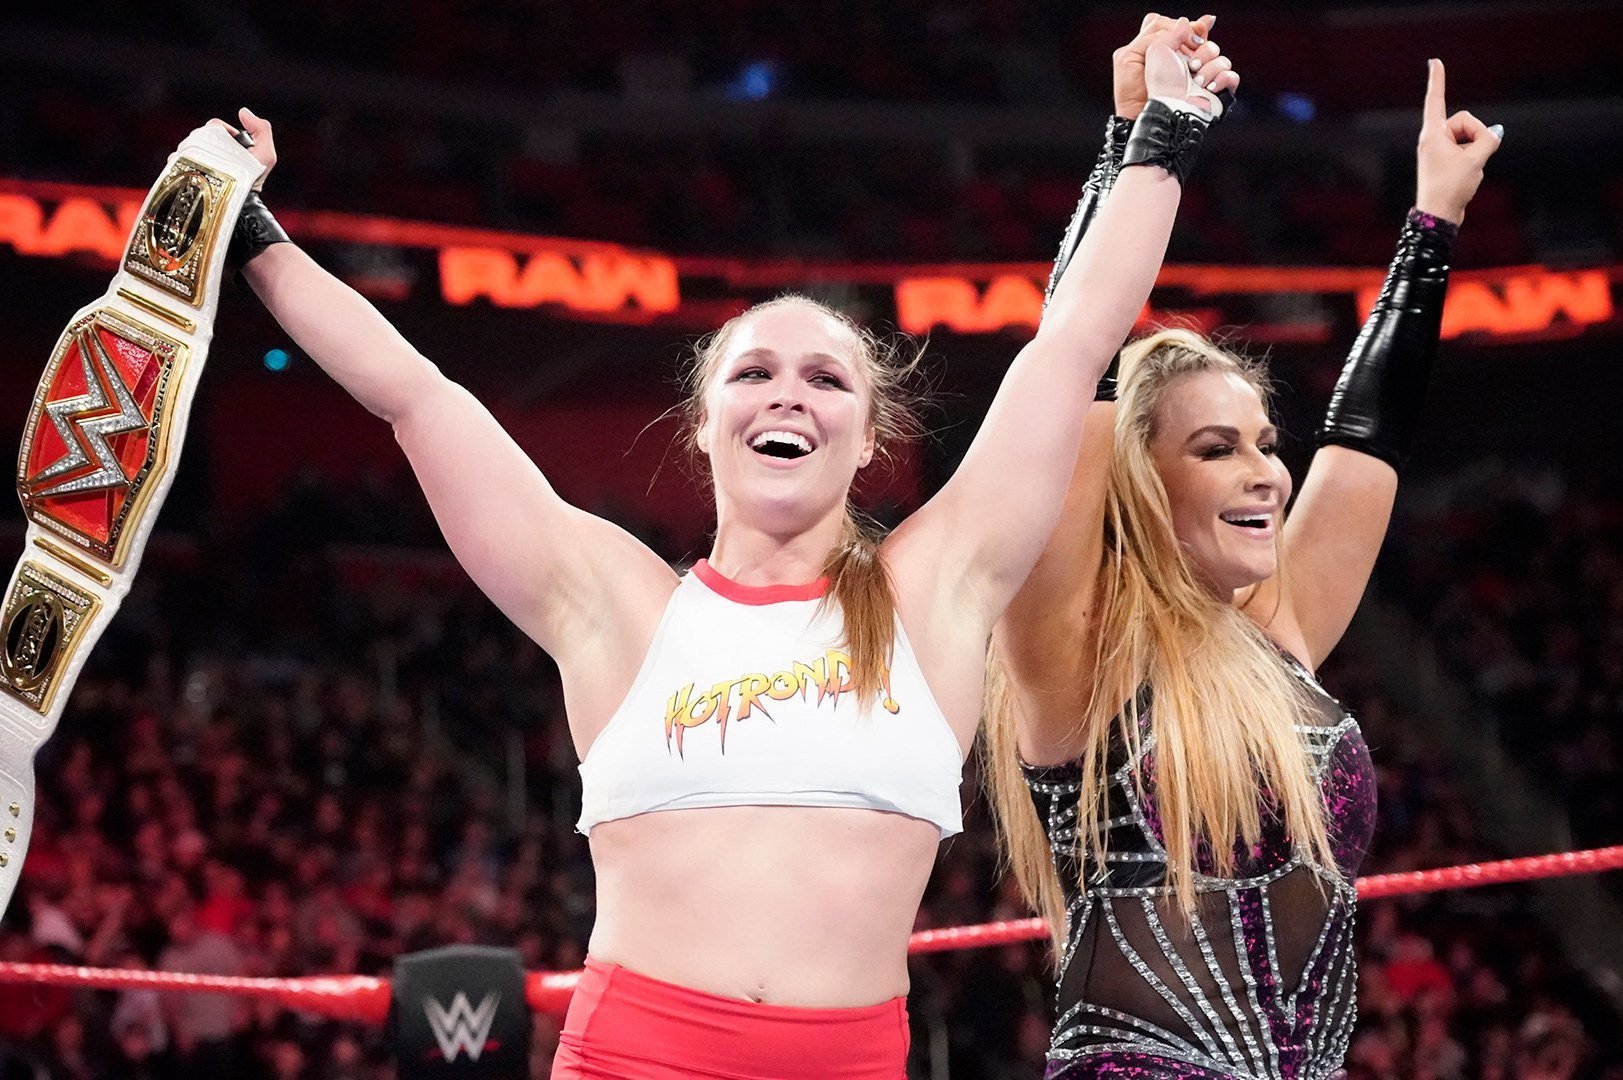 Wwe Raw Results Winners Grades Reaction And Highlights From December 31 Bleacher Report Latest News Videos And Highlights